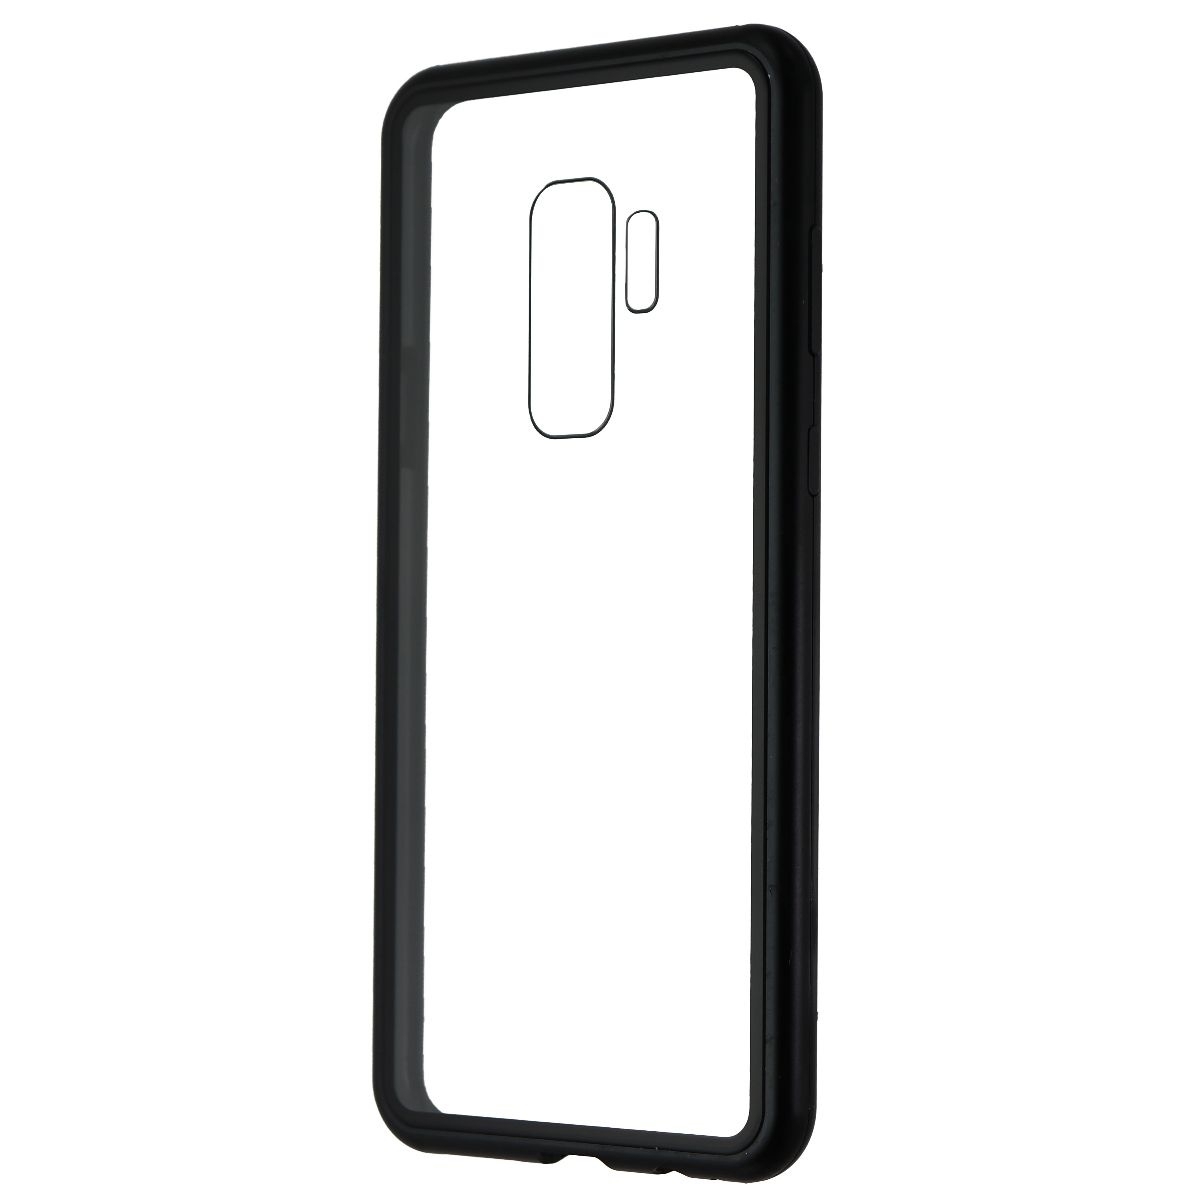 Zore Hybrid Glass Series Case For Samsung Galaxy S9 Plus - Clear/Black